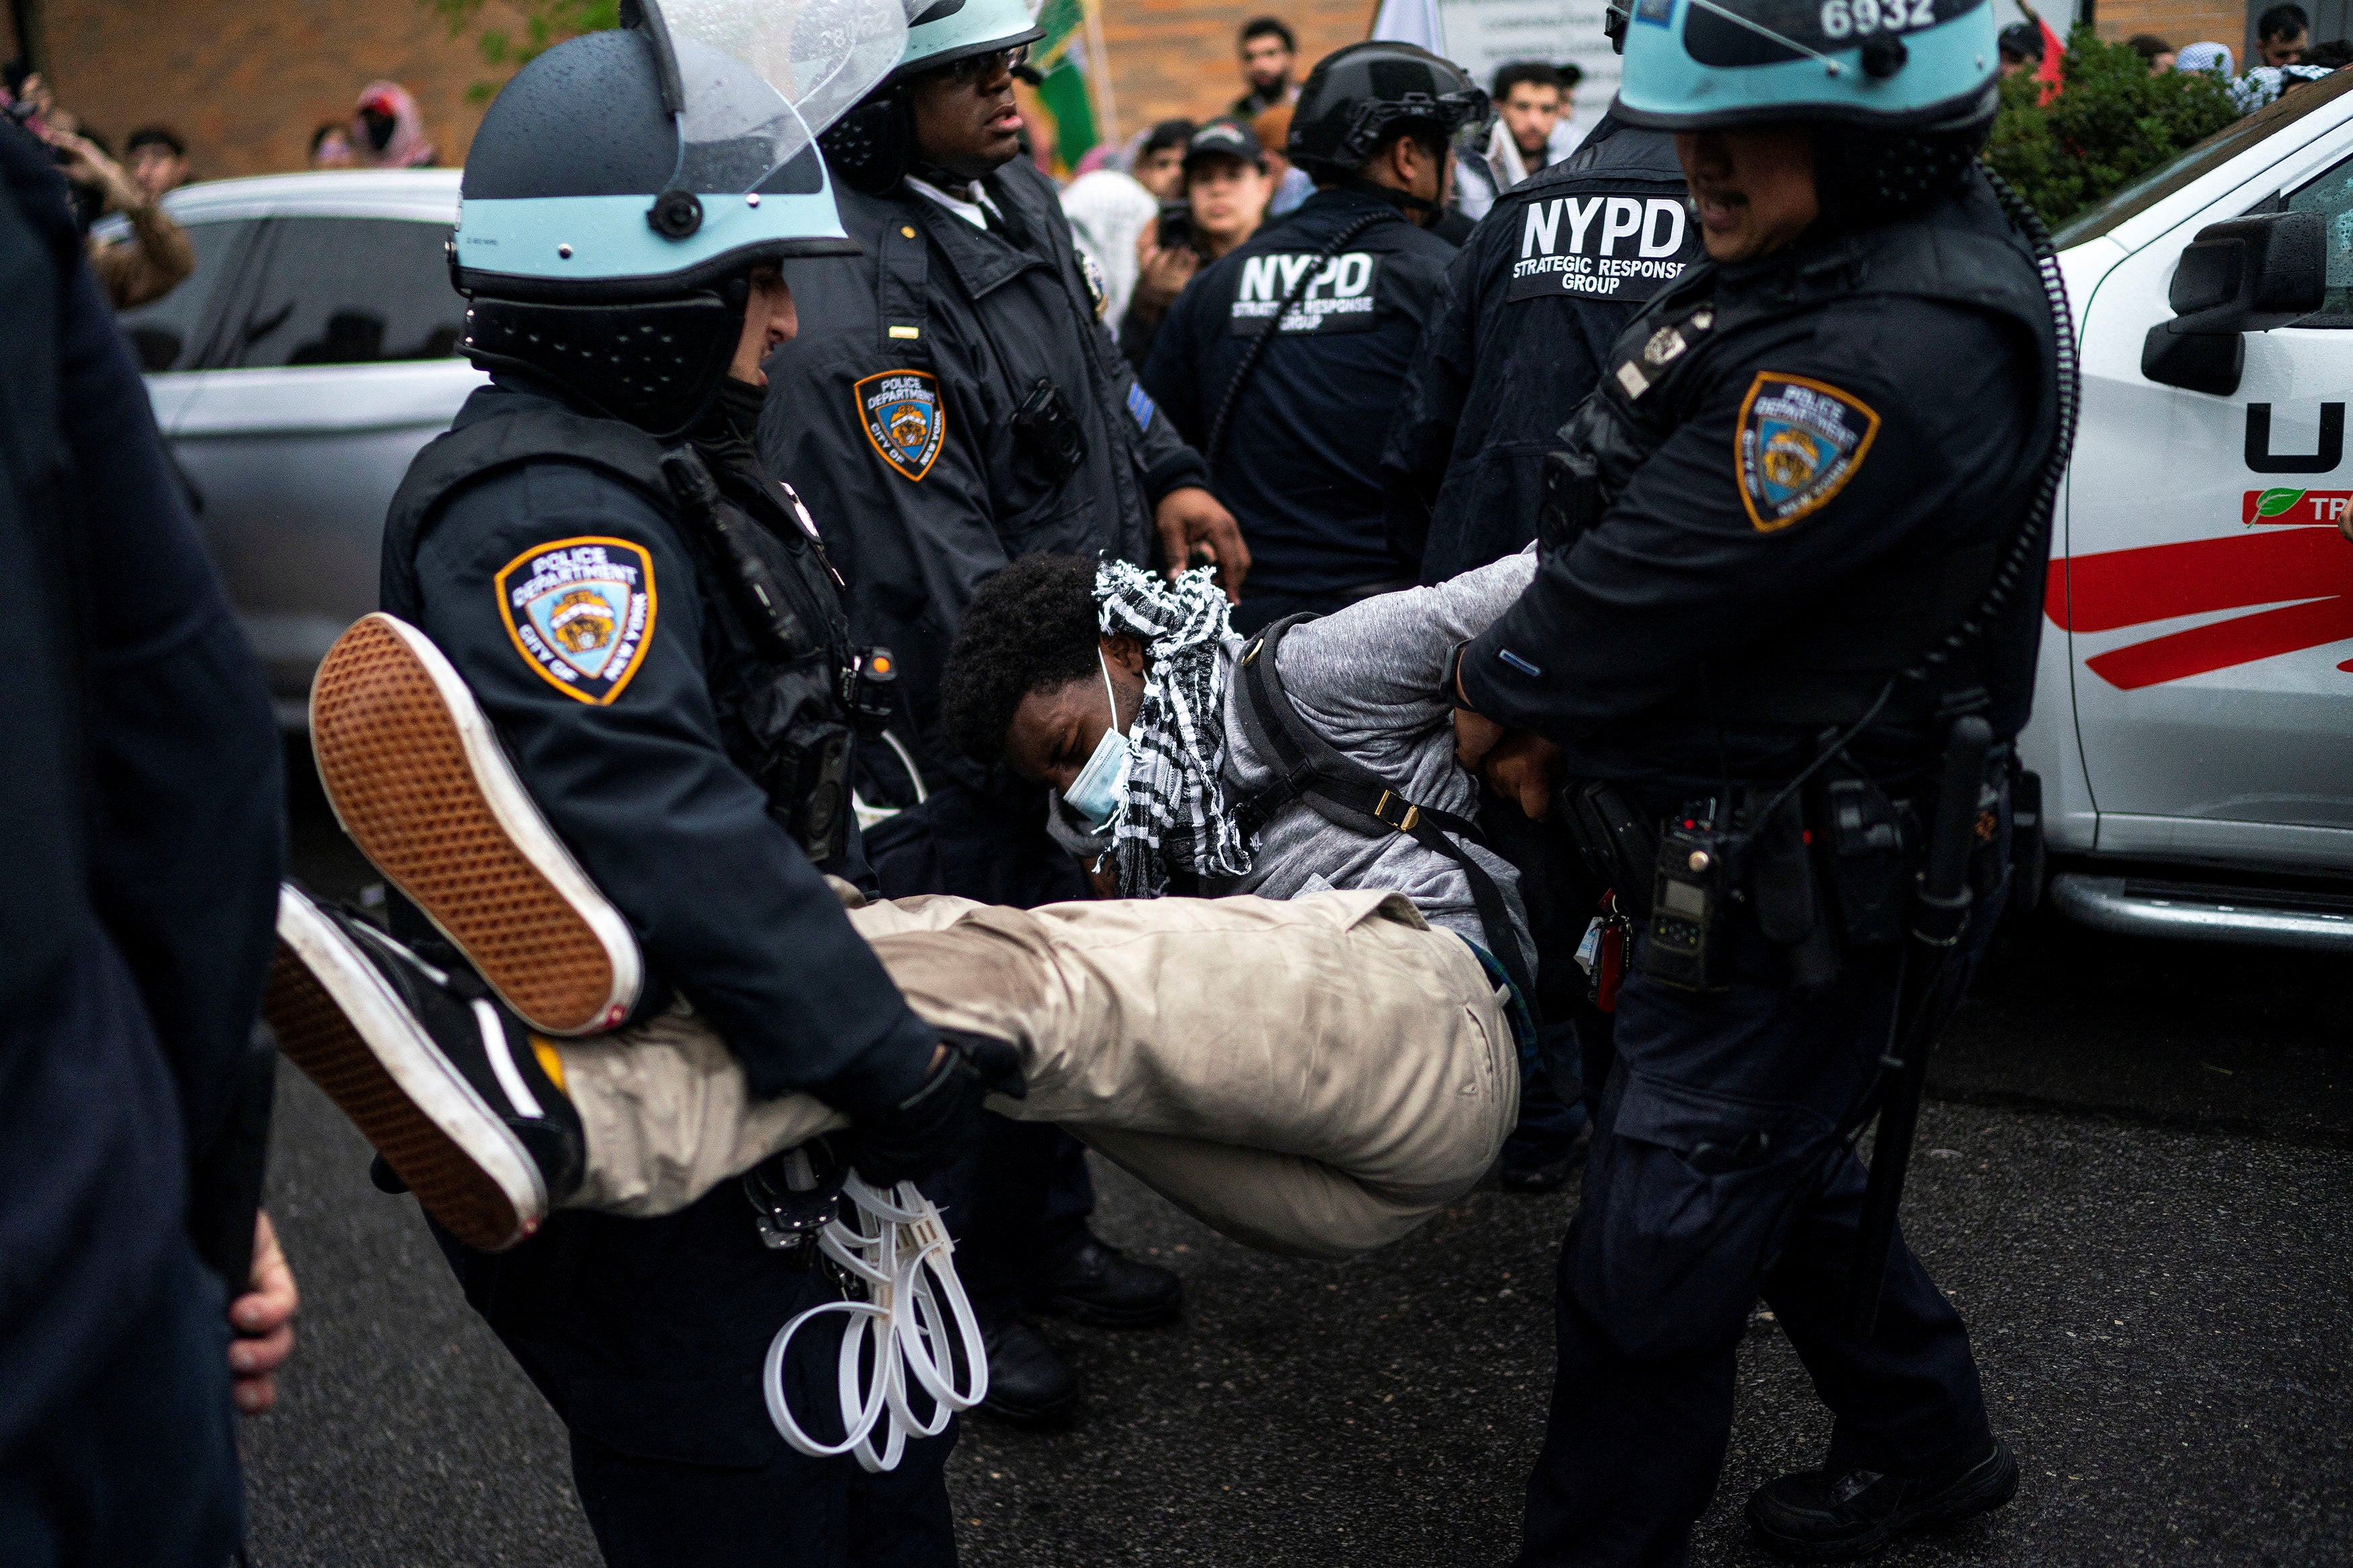 New York Police Department officers arrest a demonstrator during the protest in Brooklyn on 18 May